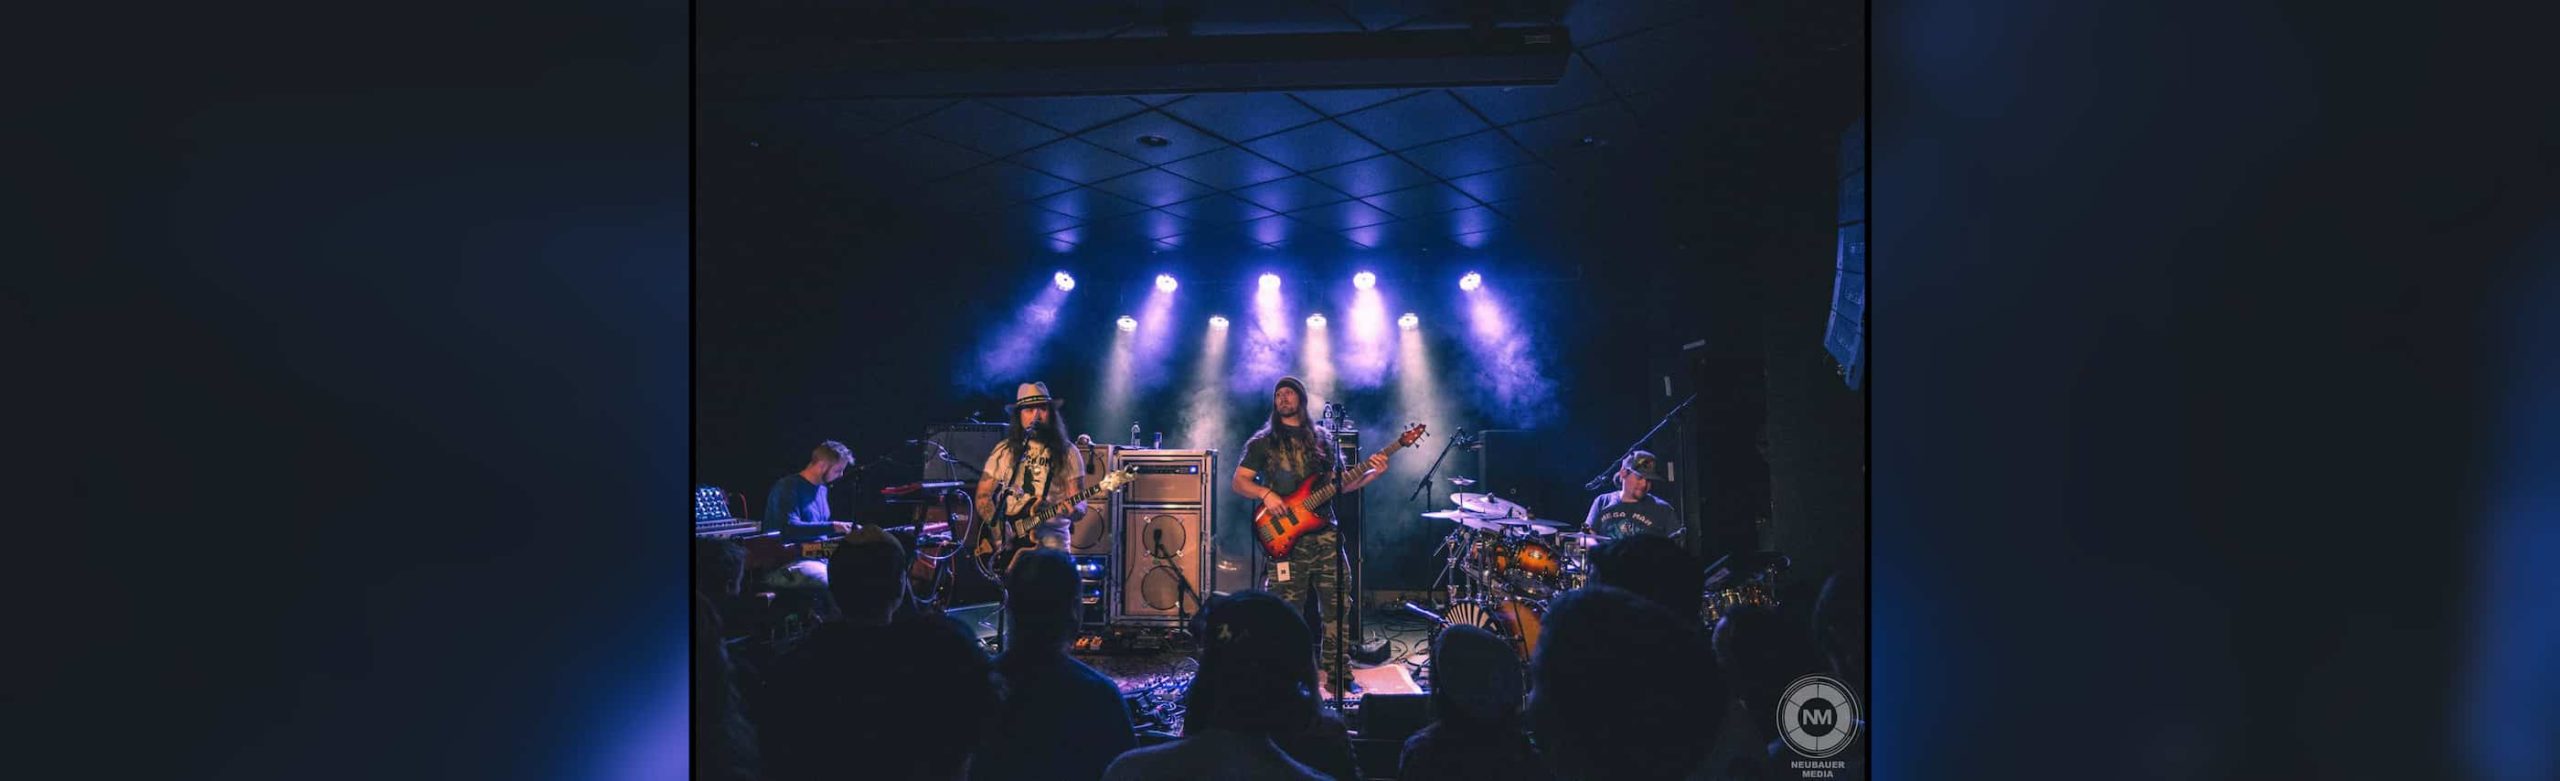 Listen Back: Twiddle at the Top Hat in 2016 (Full Recording) Image